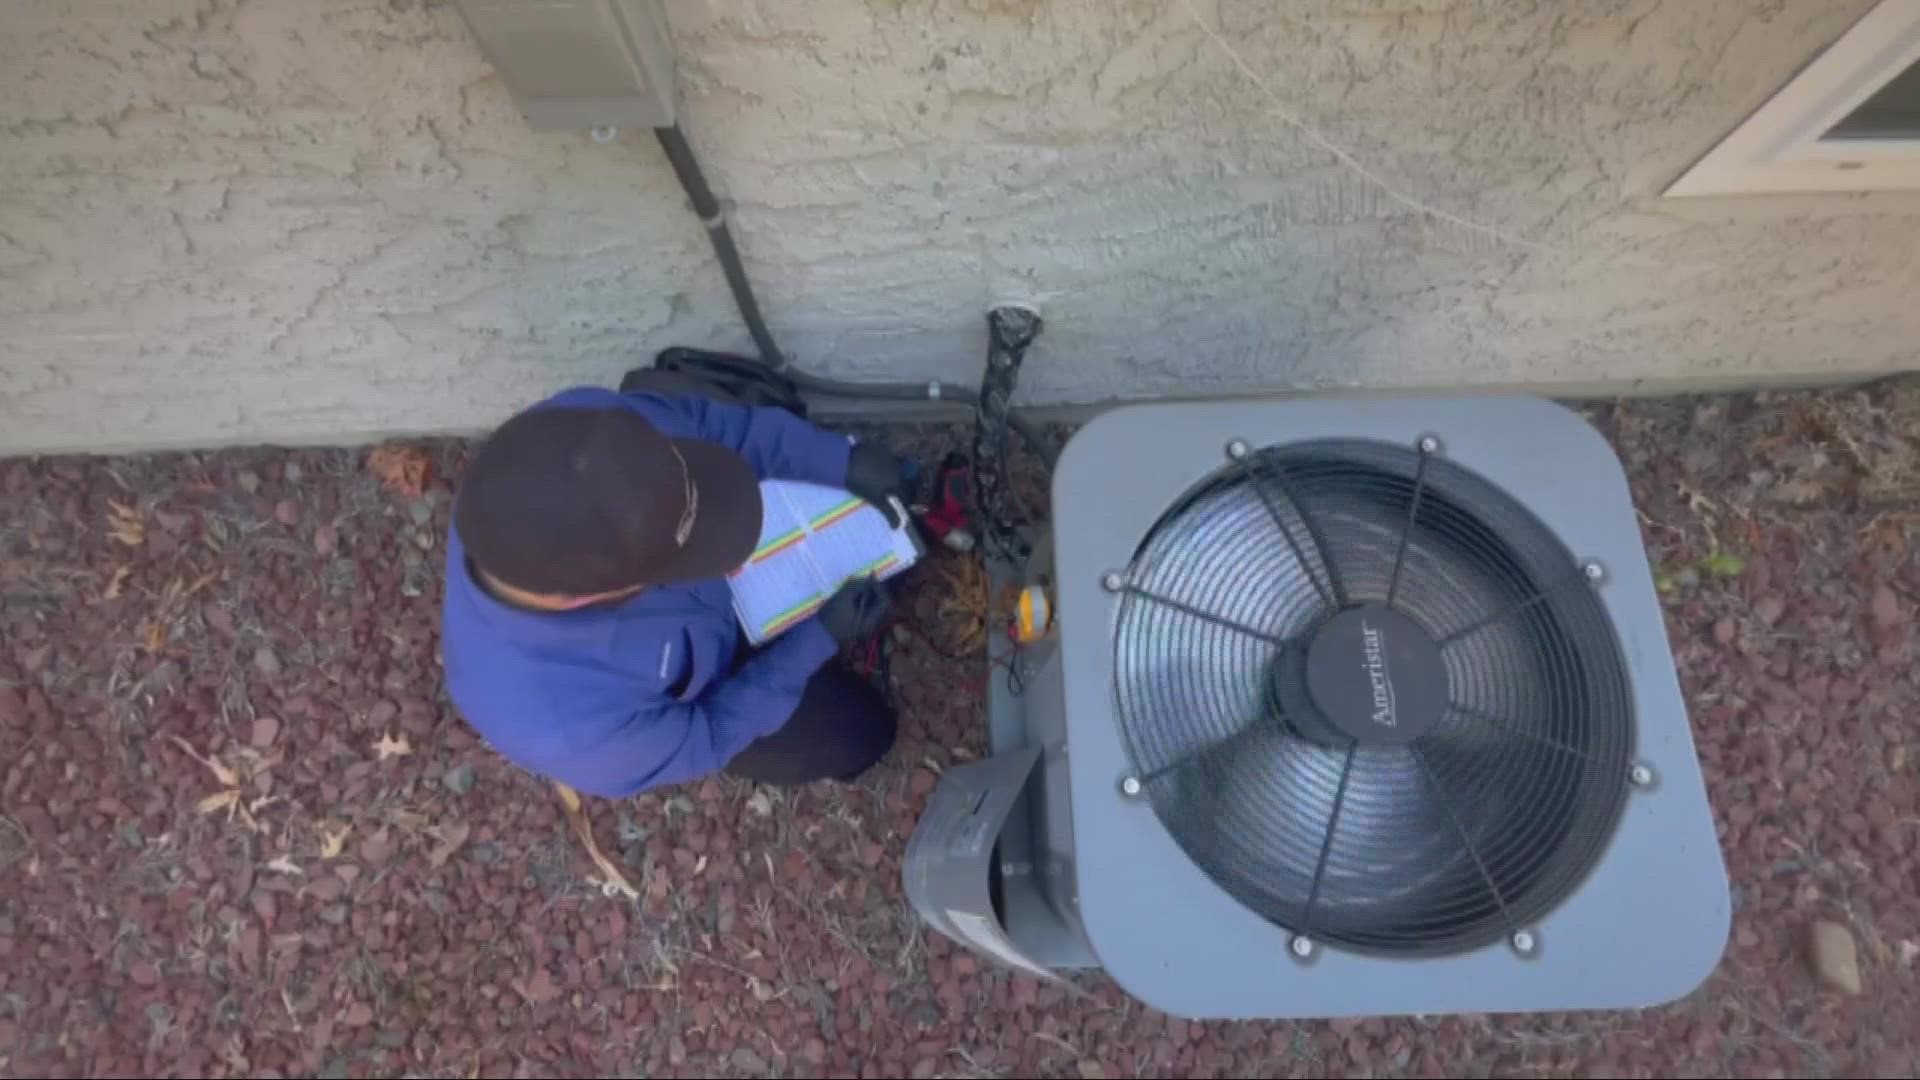 As a major heat wave bares down on Northern California, area heating and cooling experts are offering tips on proper air conditioning maintenance.